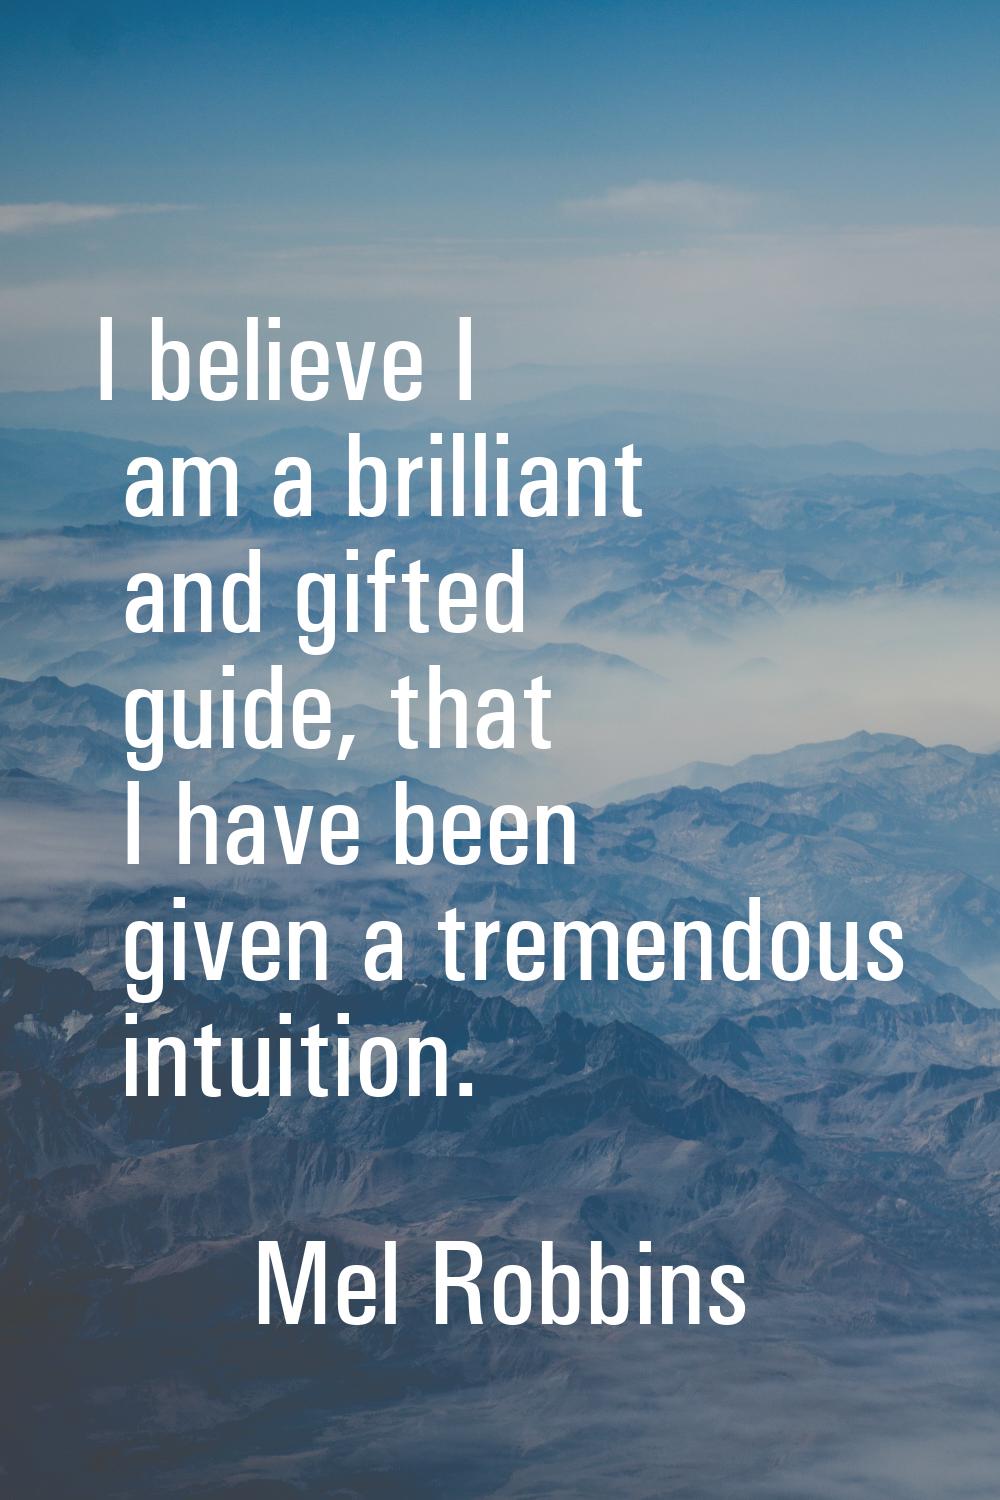 I believe I am a brilliant and gifted guide, that I have been given a tremendous intuition.